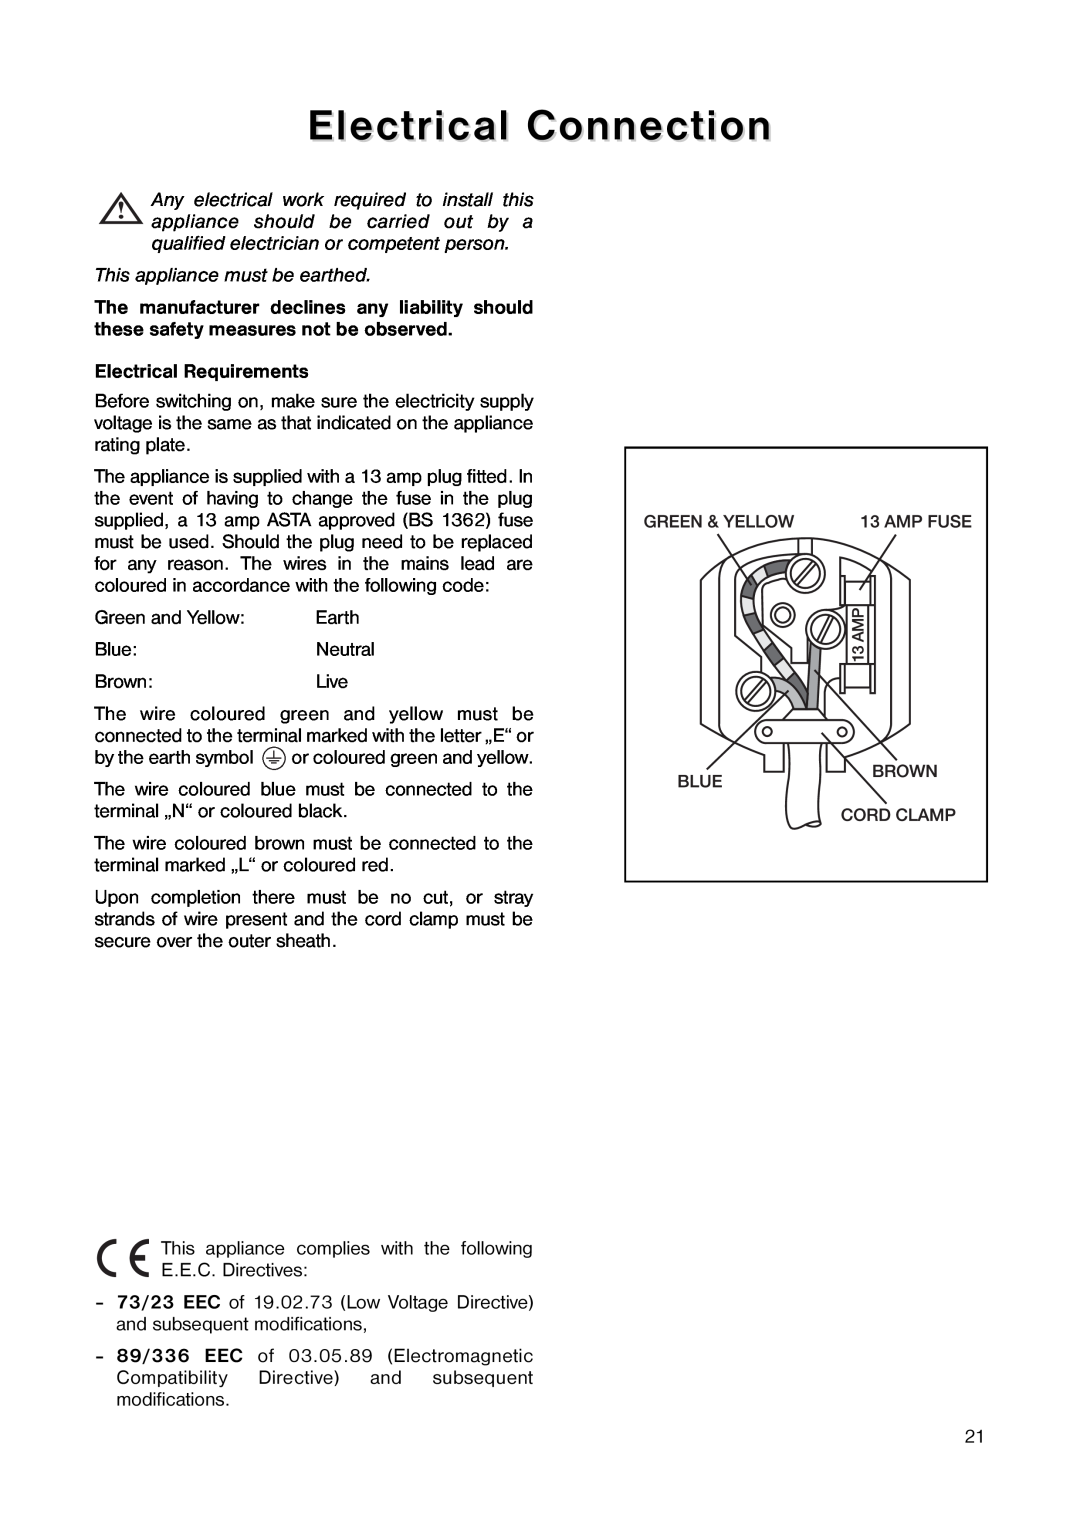 Tricity Bendix TB 100 FF installation instructions Electrical Connection, Electrical Requirements 